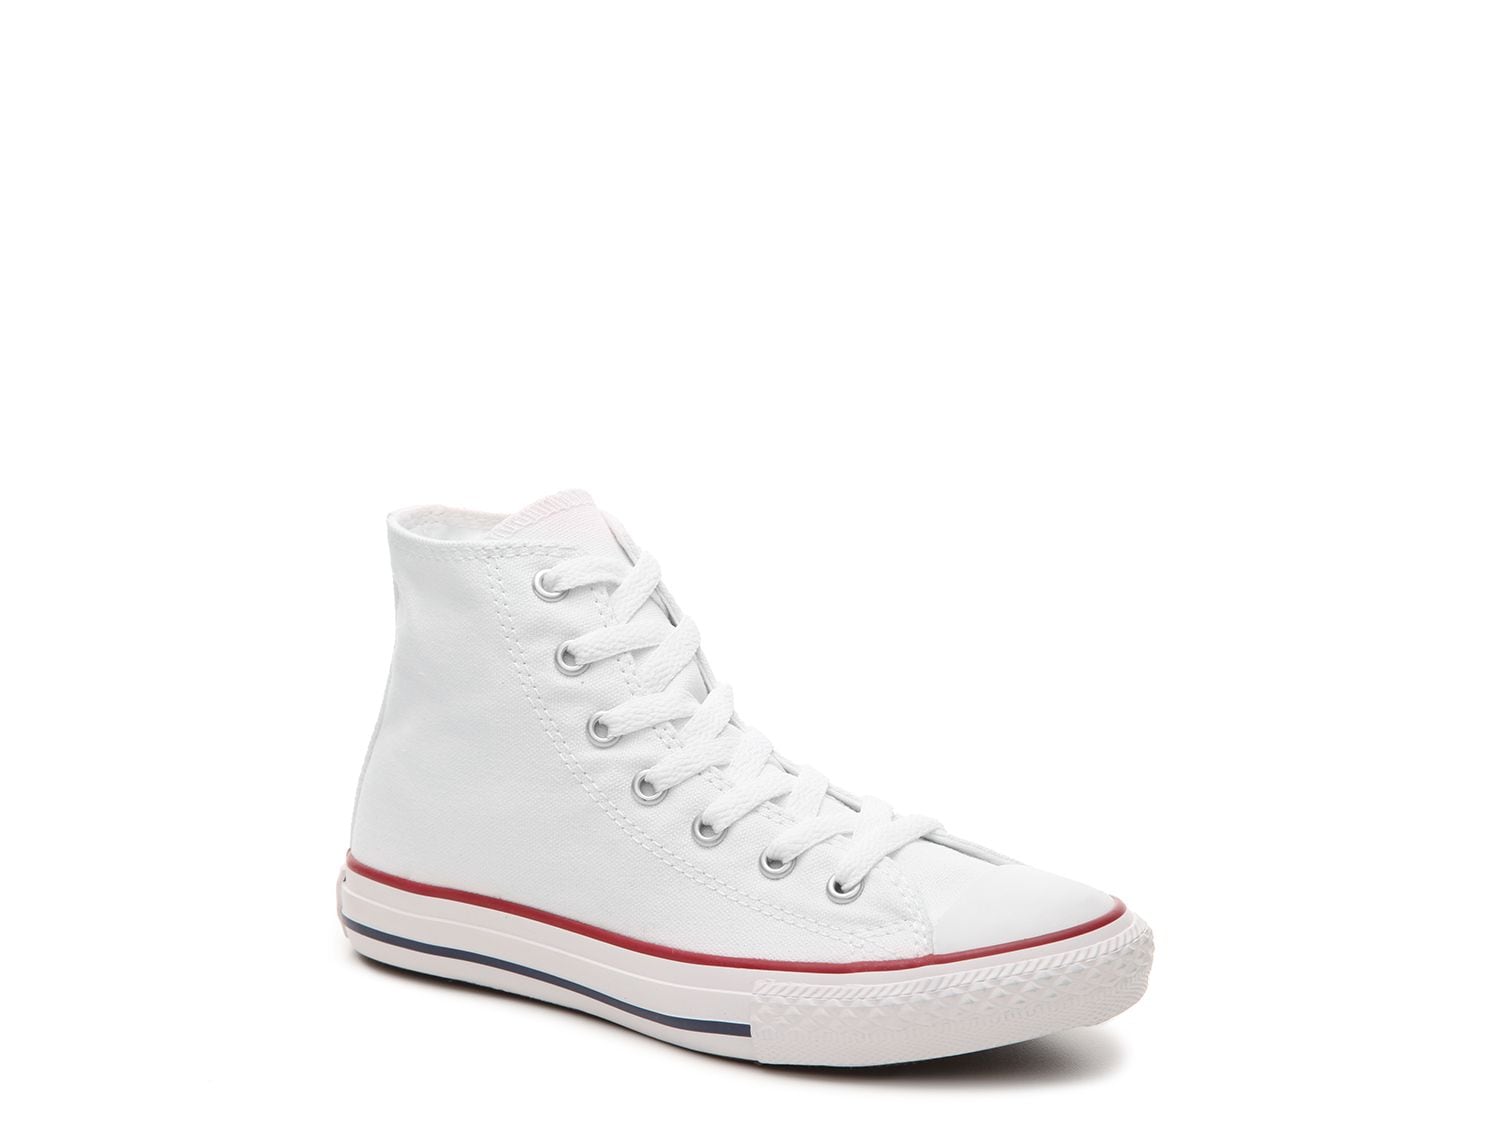 Converse Chuck Taylor All Star High-Top Sneaker - Kids' - Free Shipping ...